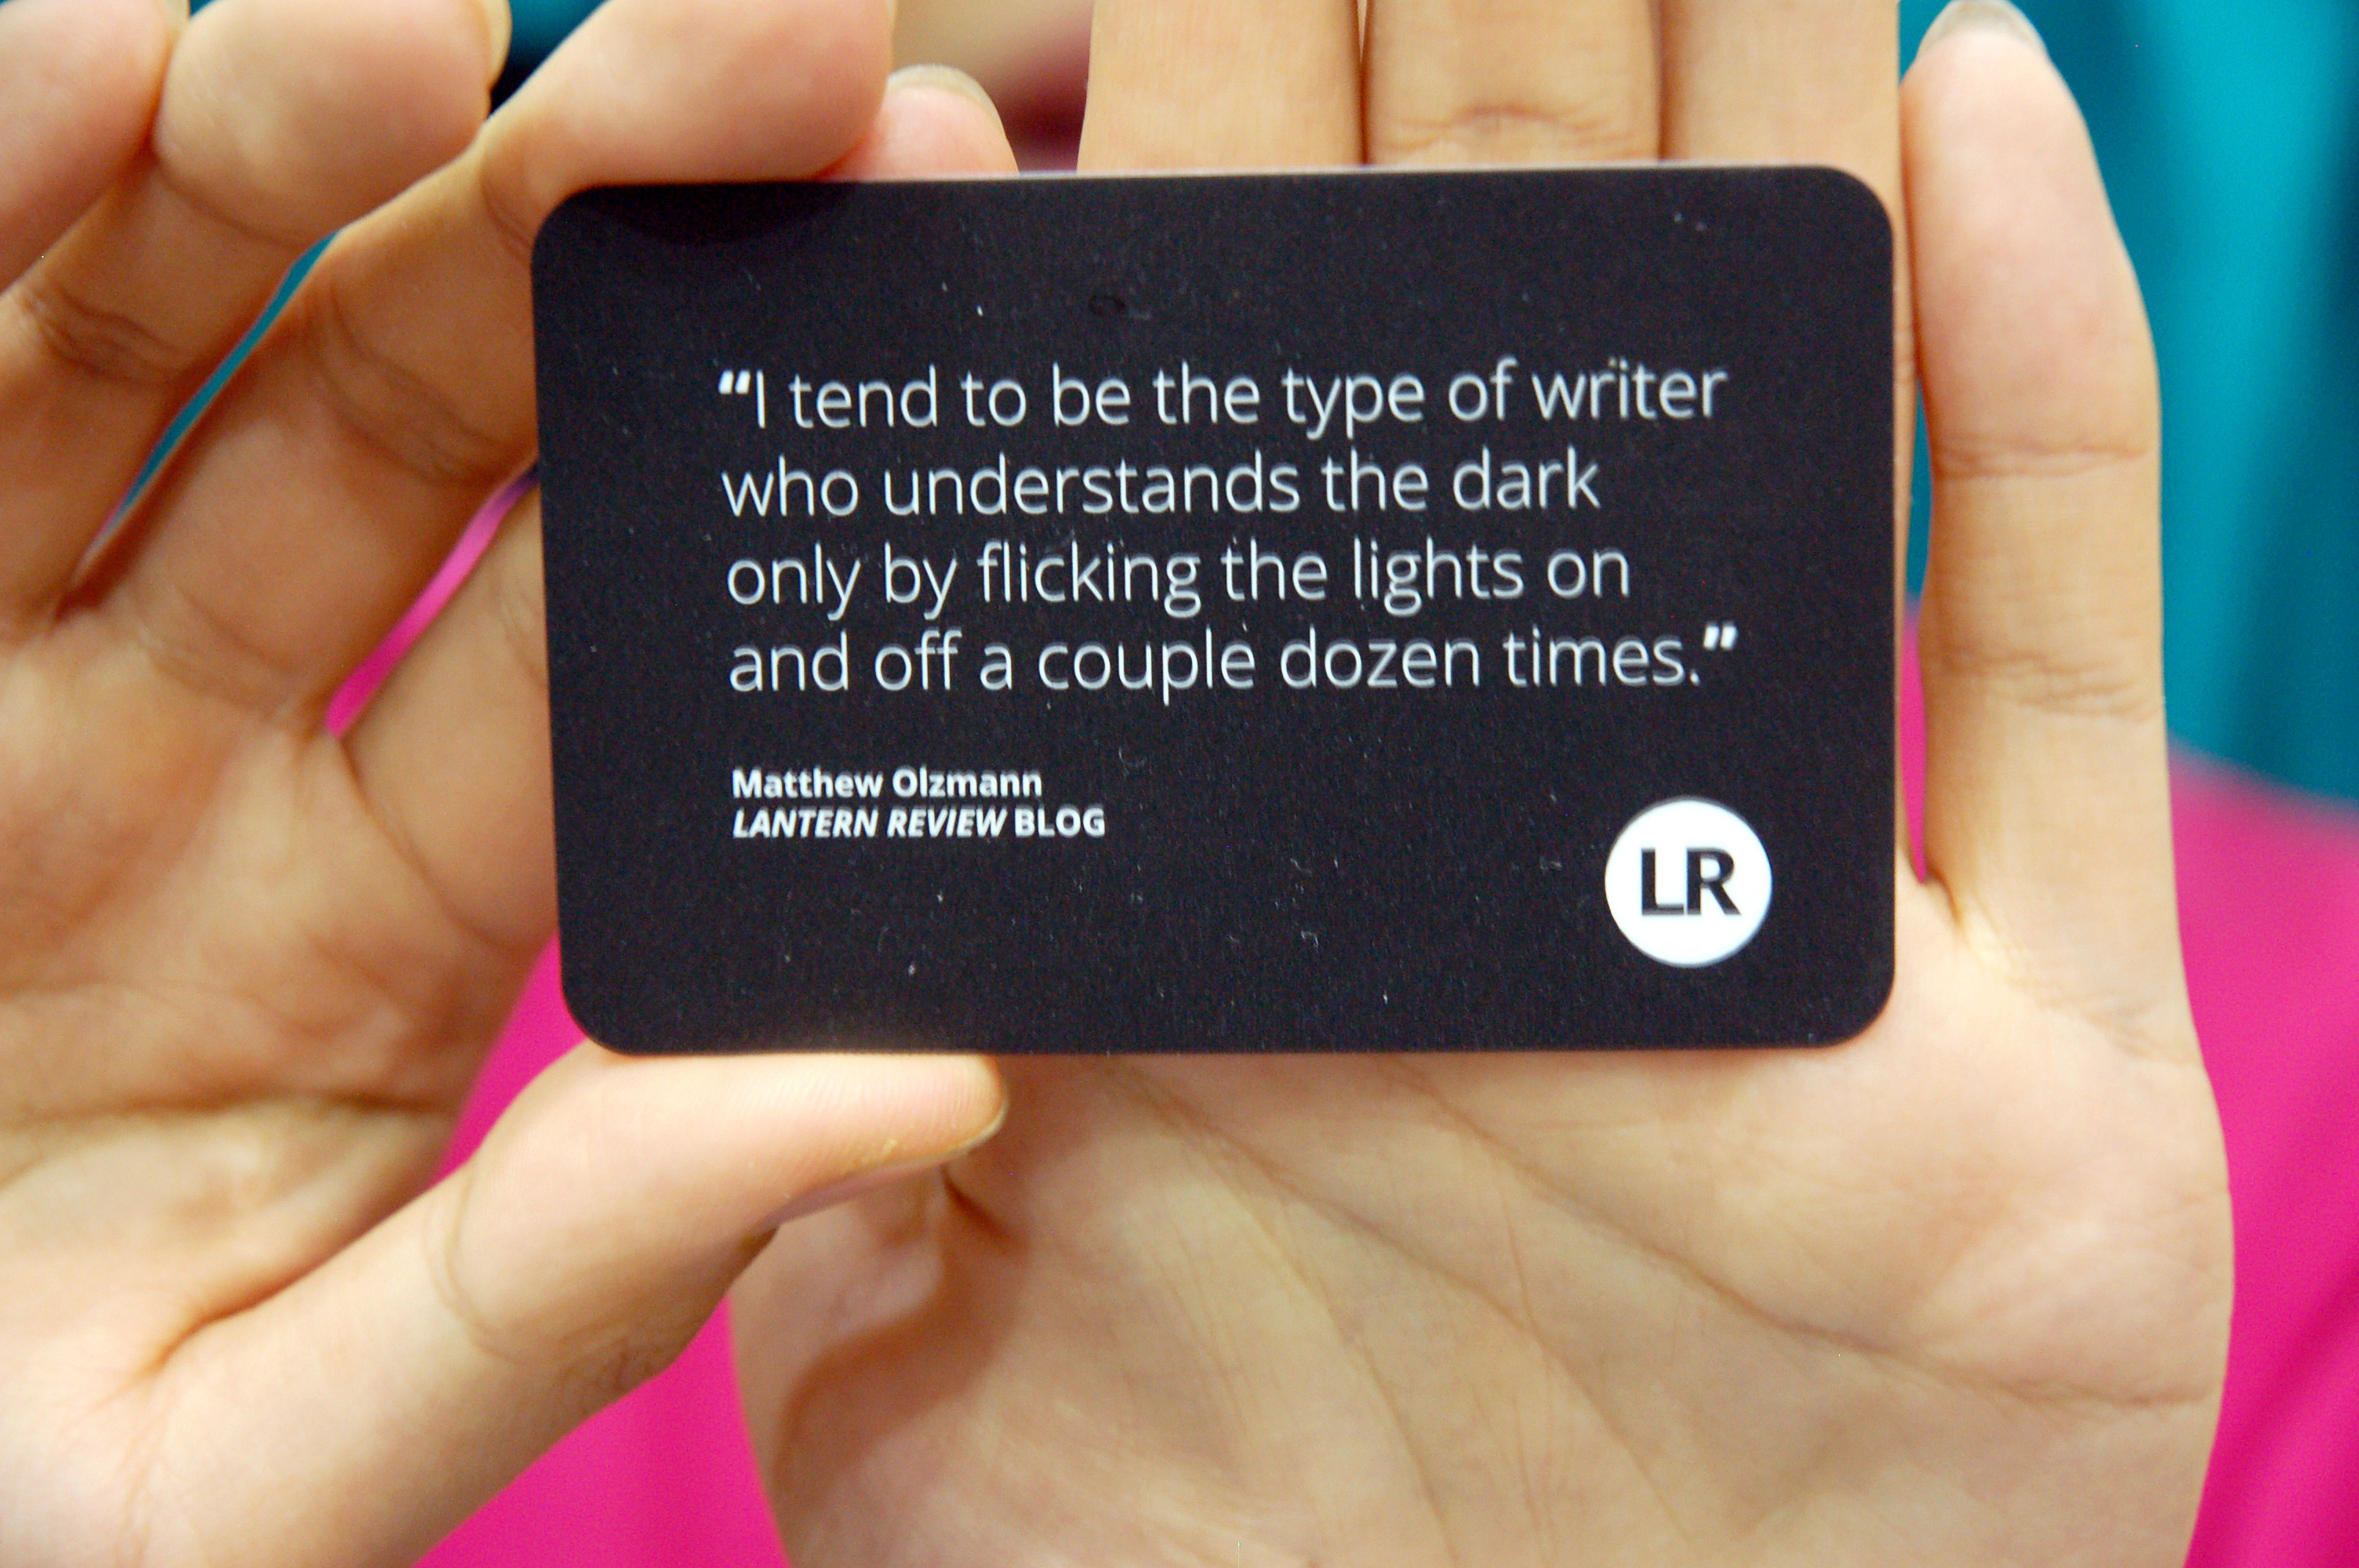 Poet, activist, and performer Wo Chan shows off a quote from Matthew Olzmann about seeking light in darkness.